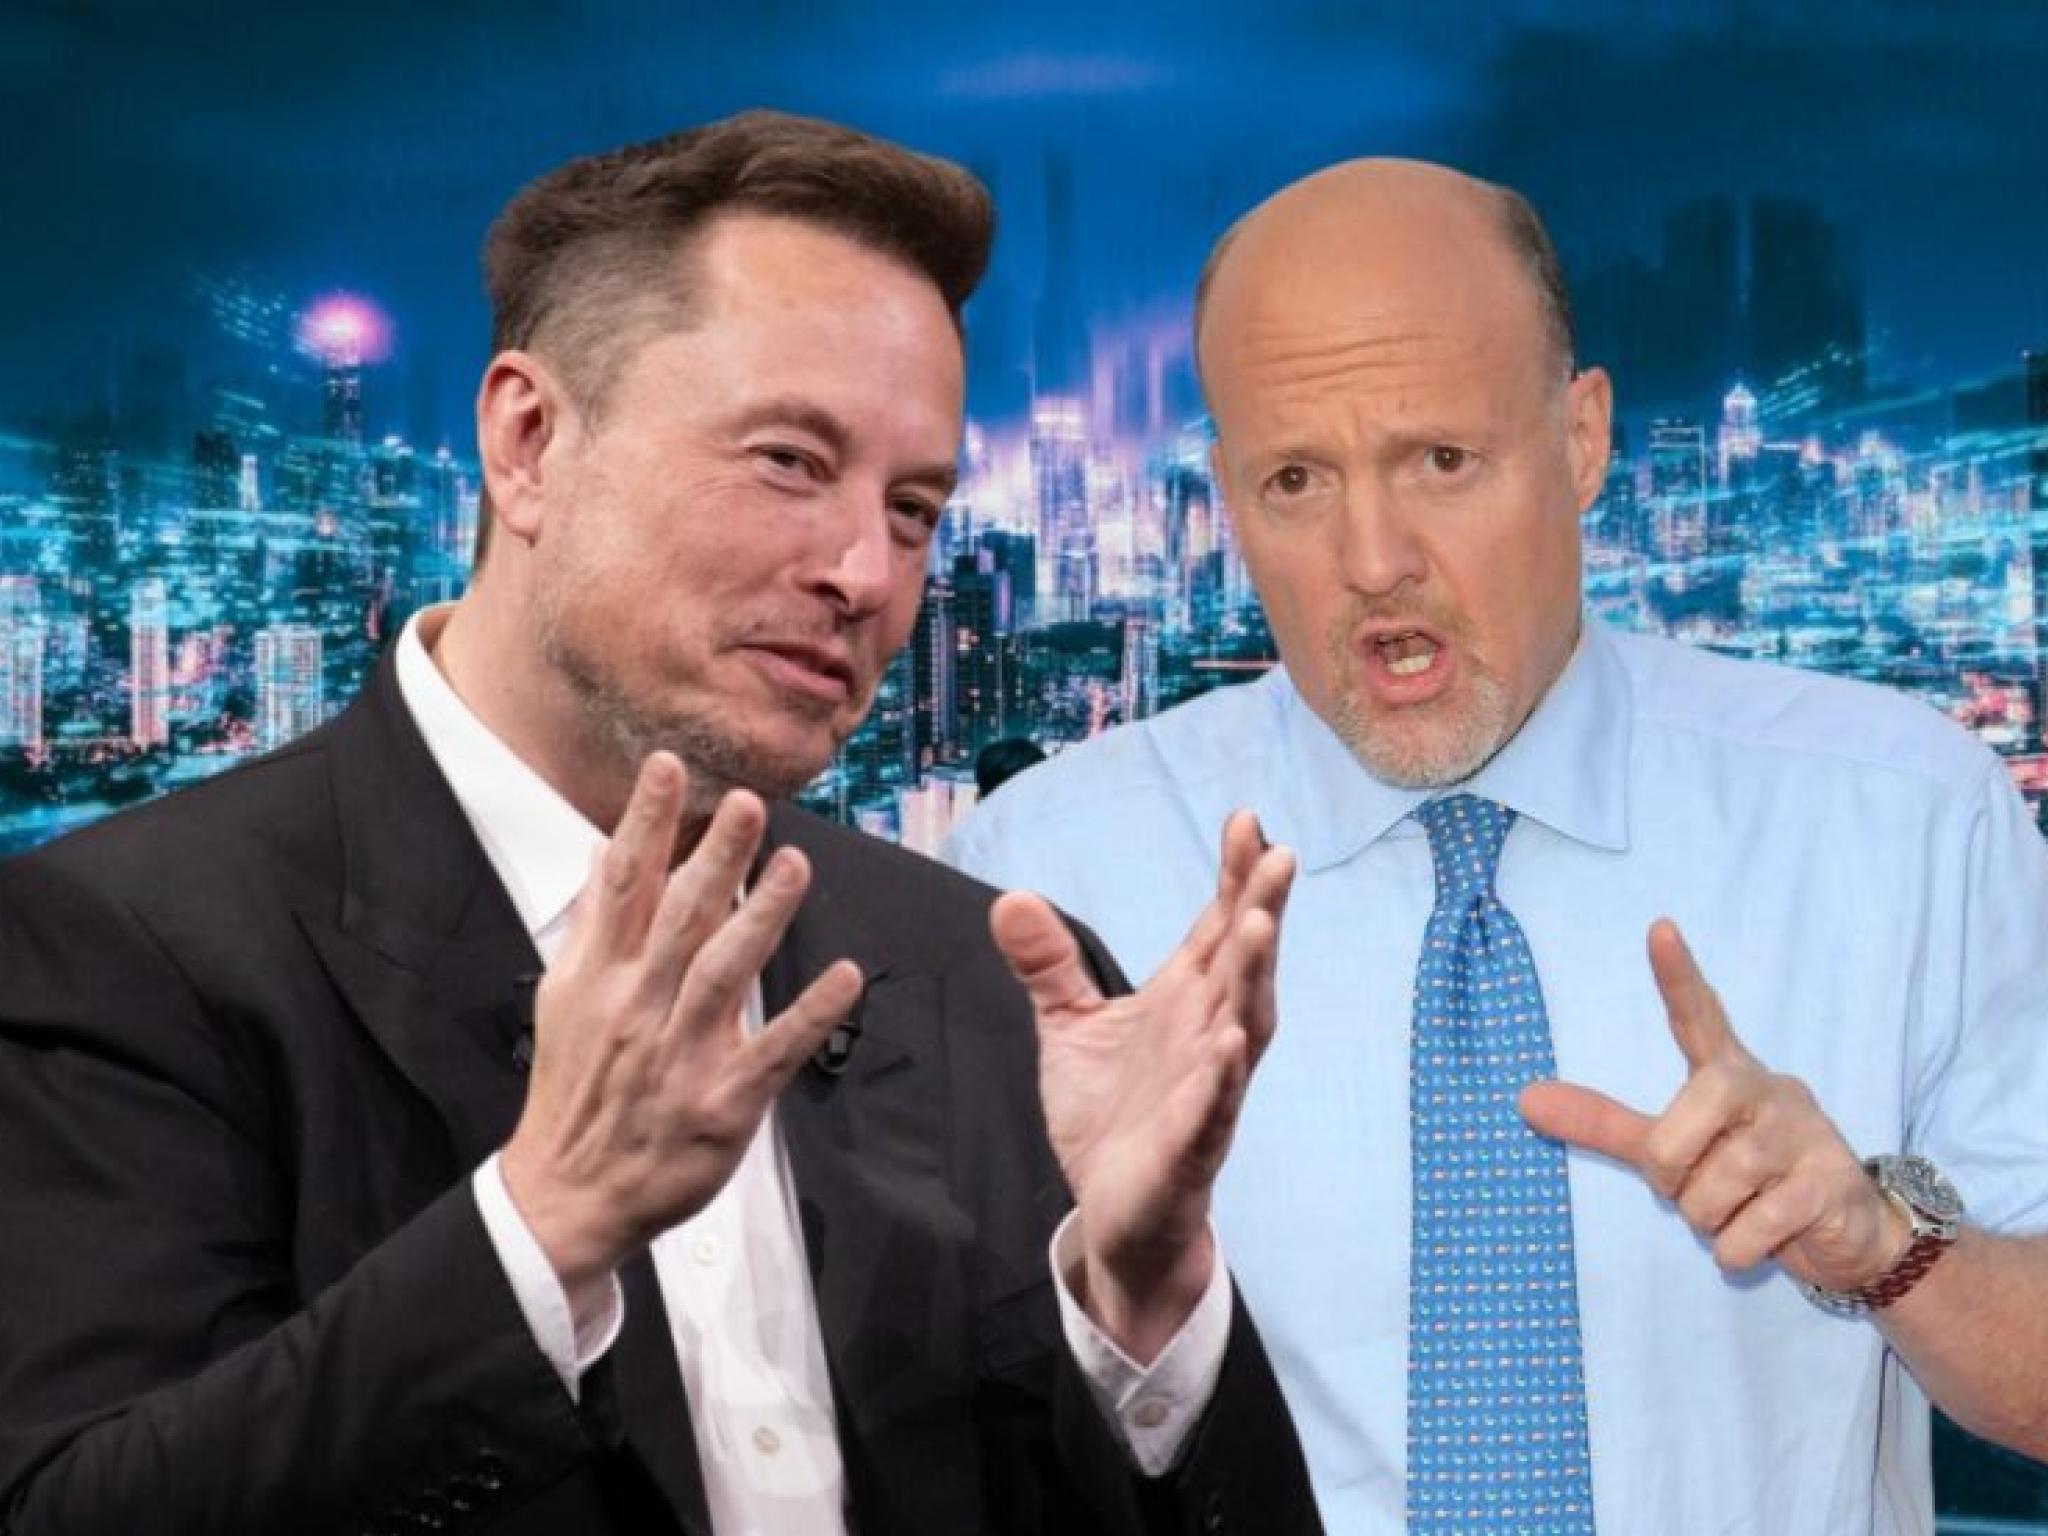  elon-musk-laughs-at-jim-cramer-saying-hed-rather-buy-gm-over-tesla-with-ev-giants-stock-rallying-44-since-amazing 